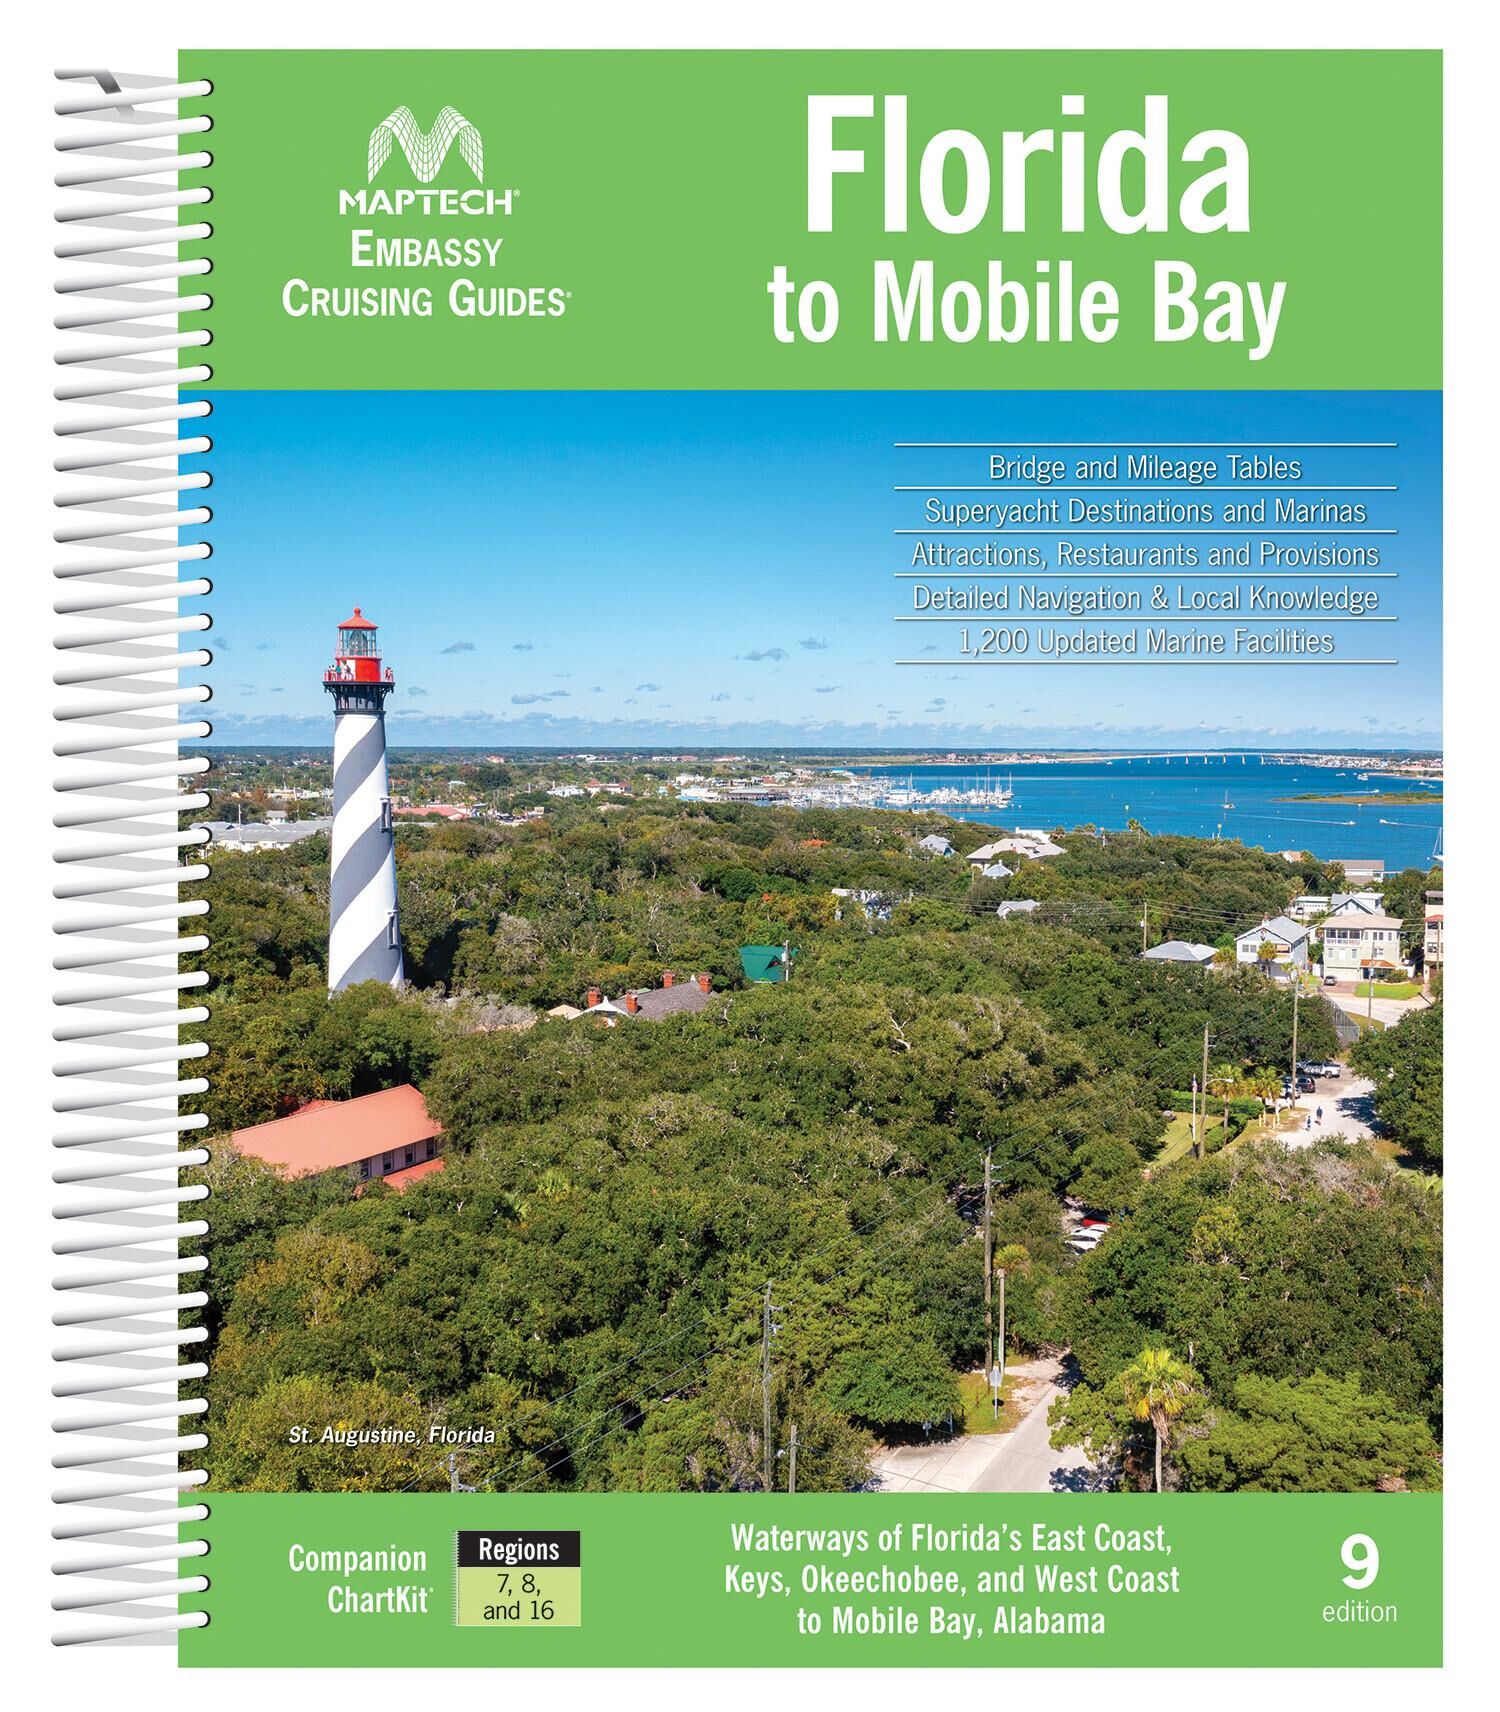 Maptech Embassy Guide: Florida to Mobile Bay 9th Edition